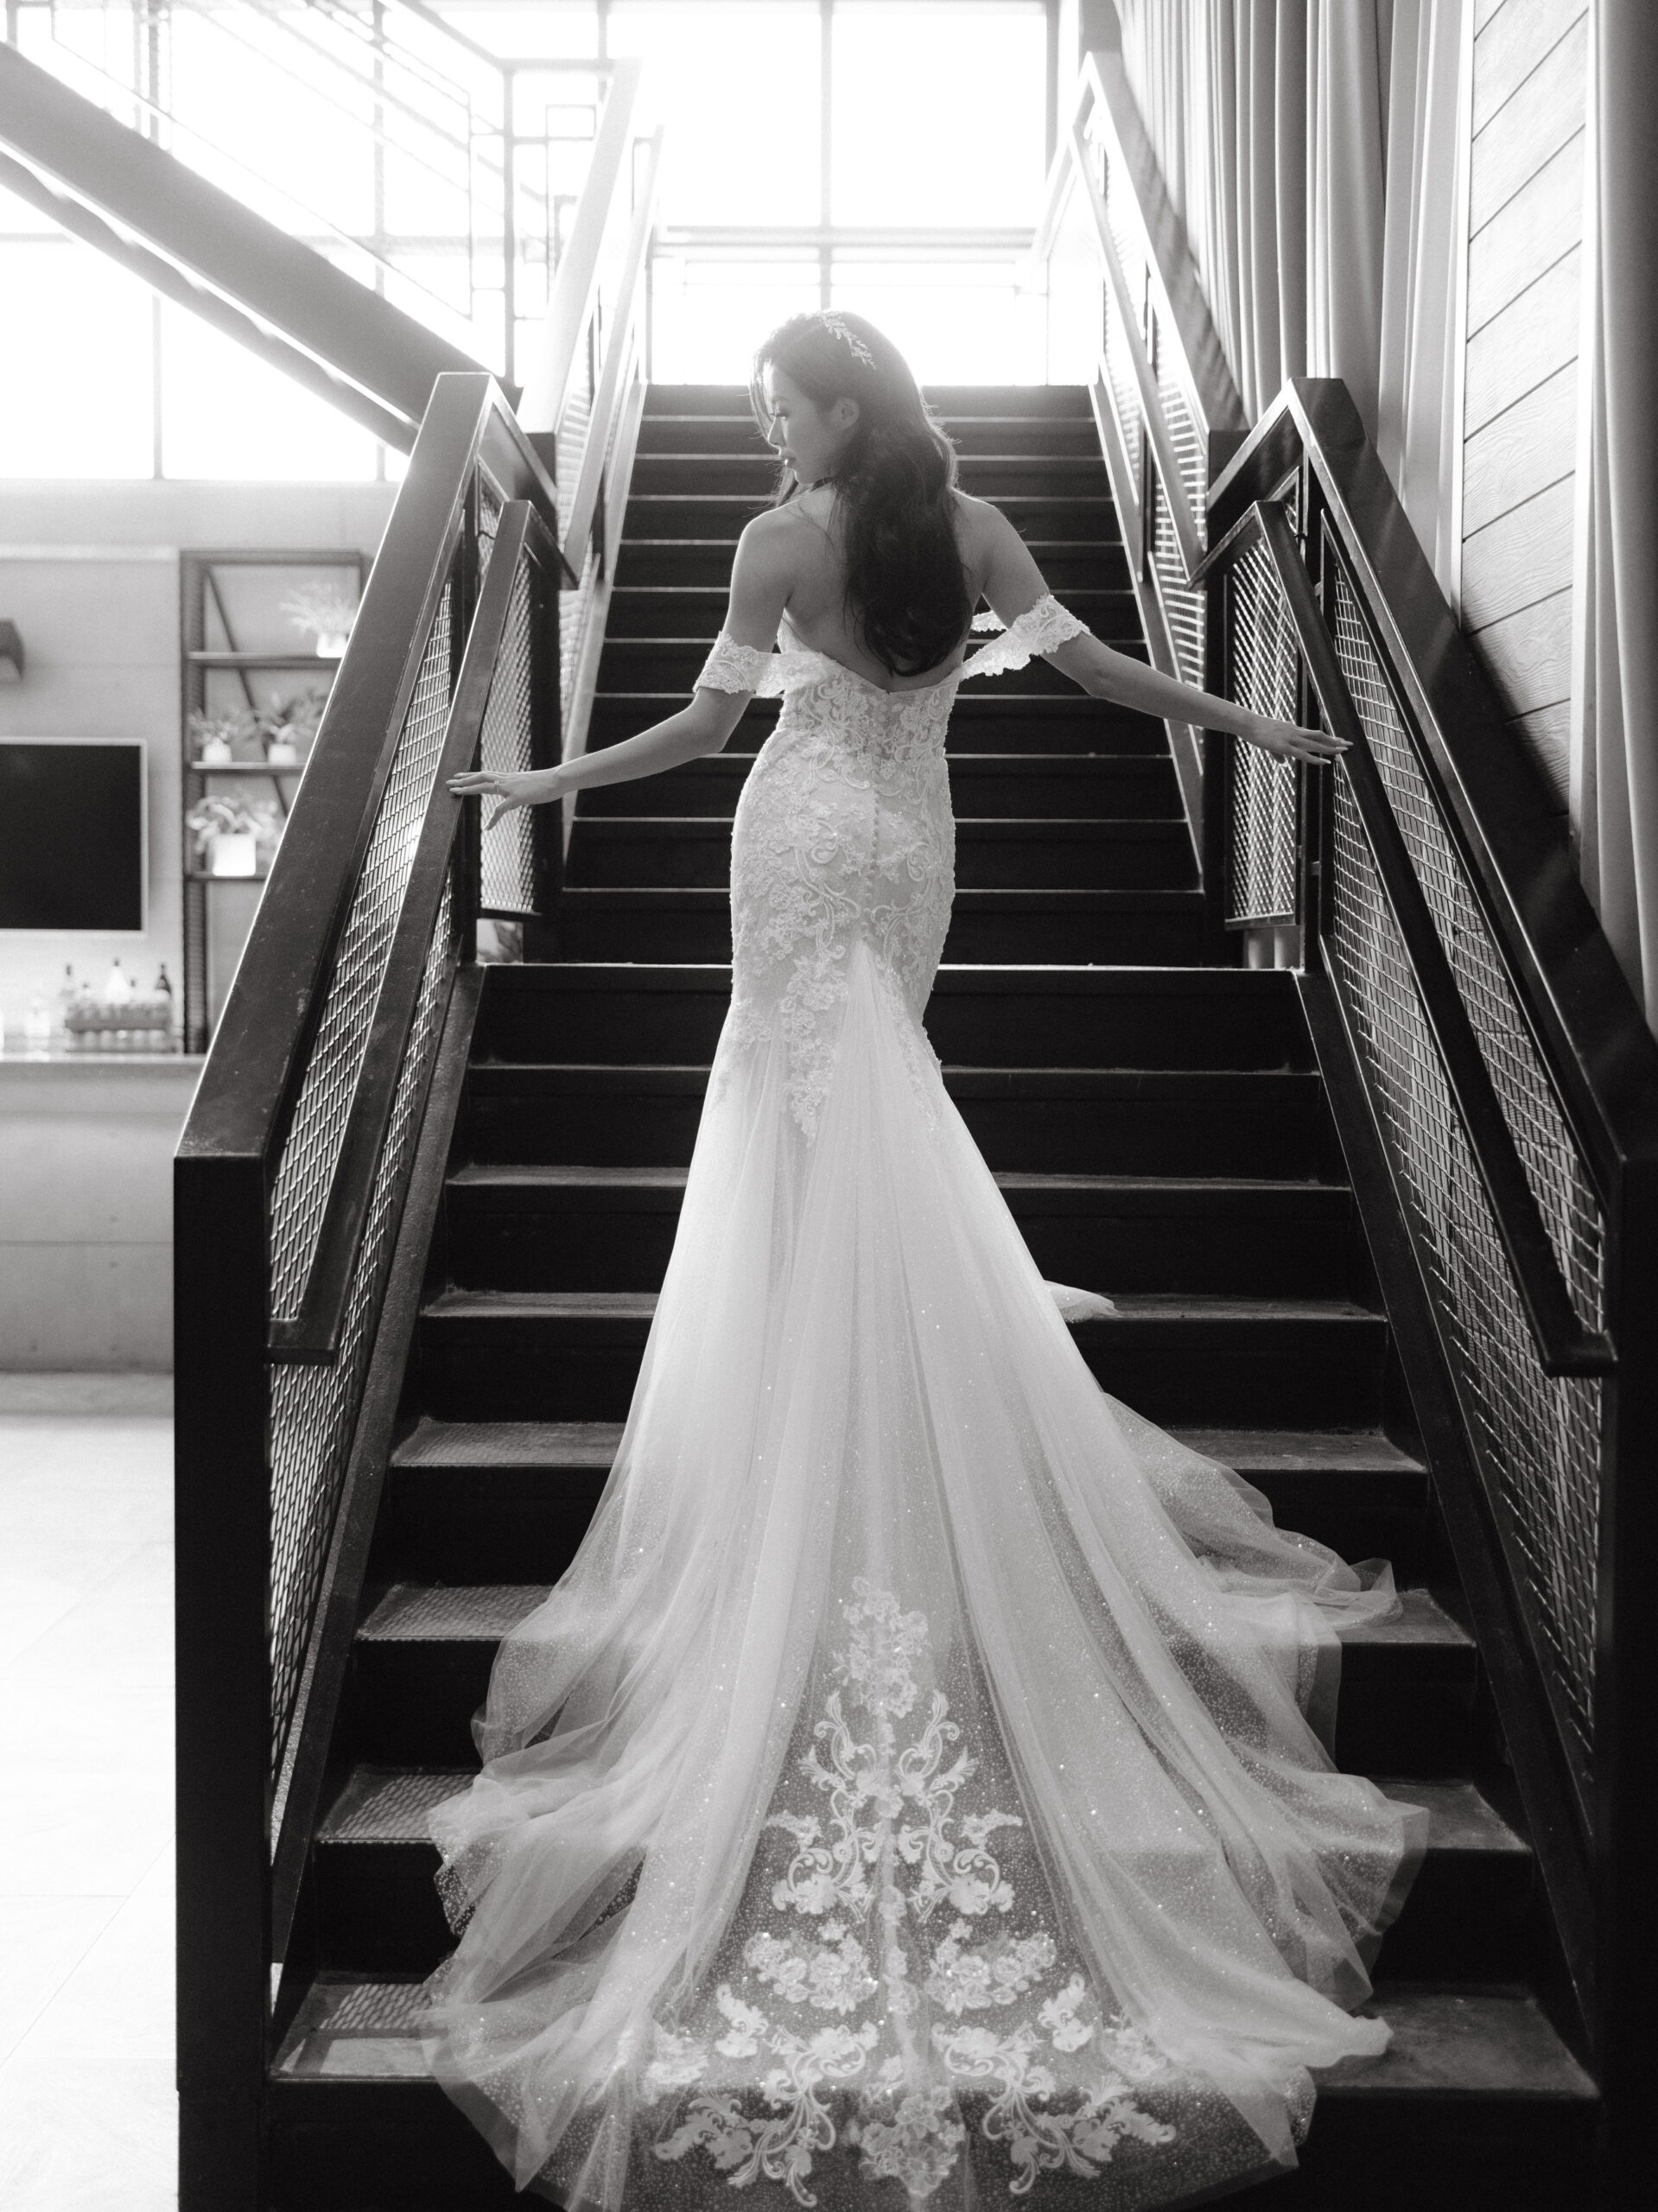 Editorial photo of the bride climbing up the stairs. 2023 wedding dress image by Jenny Fu Studio